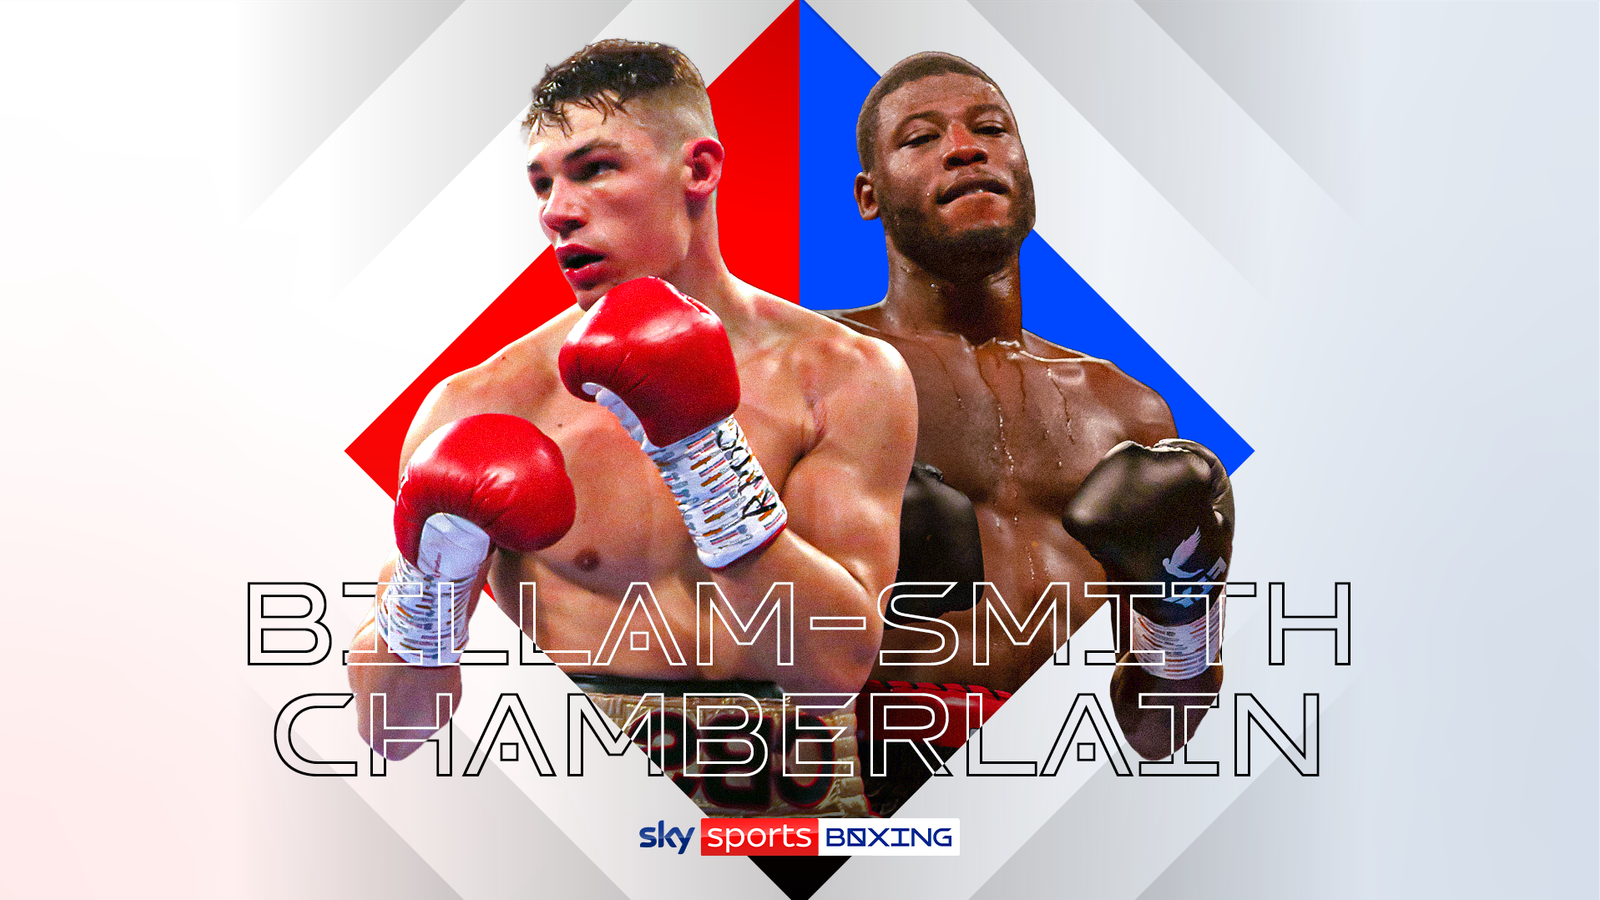 Chris Billam-Smith vs Isaac Chamberlain: Watch the live stream of the public workout from 5.15pm